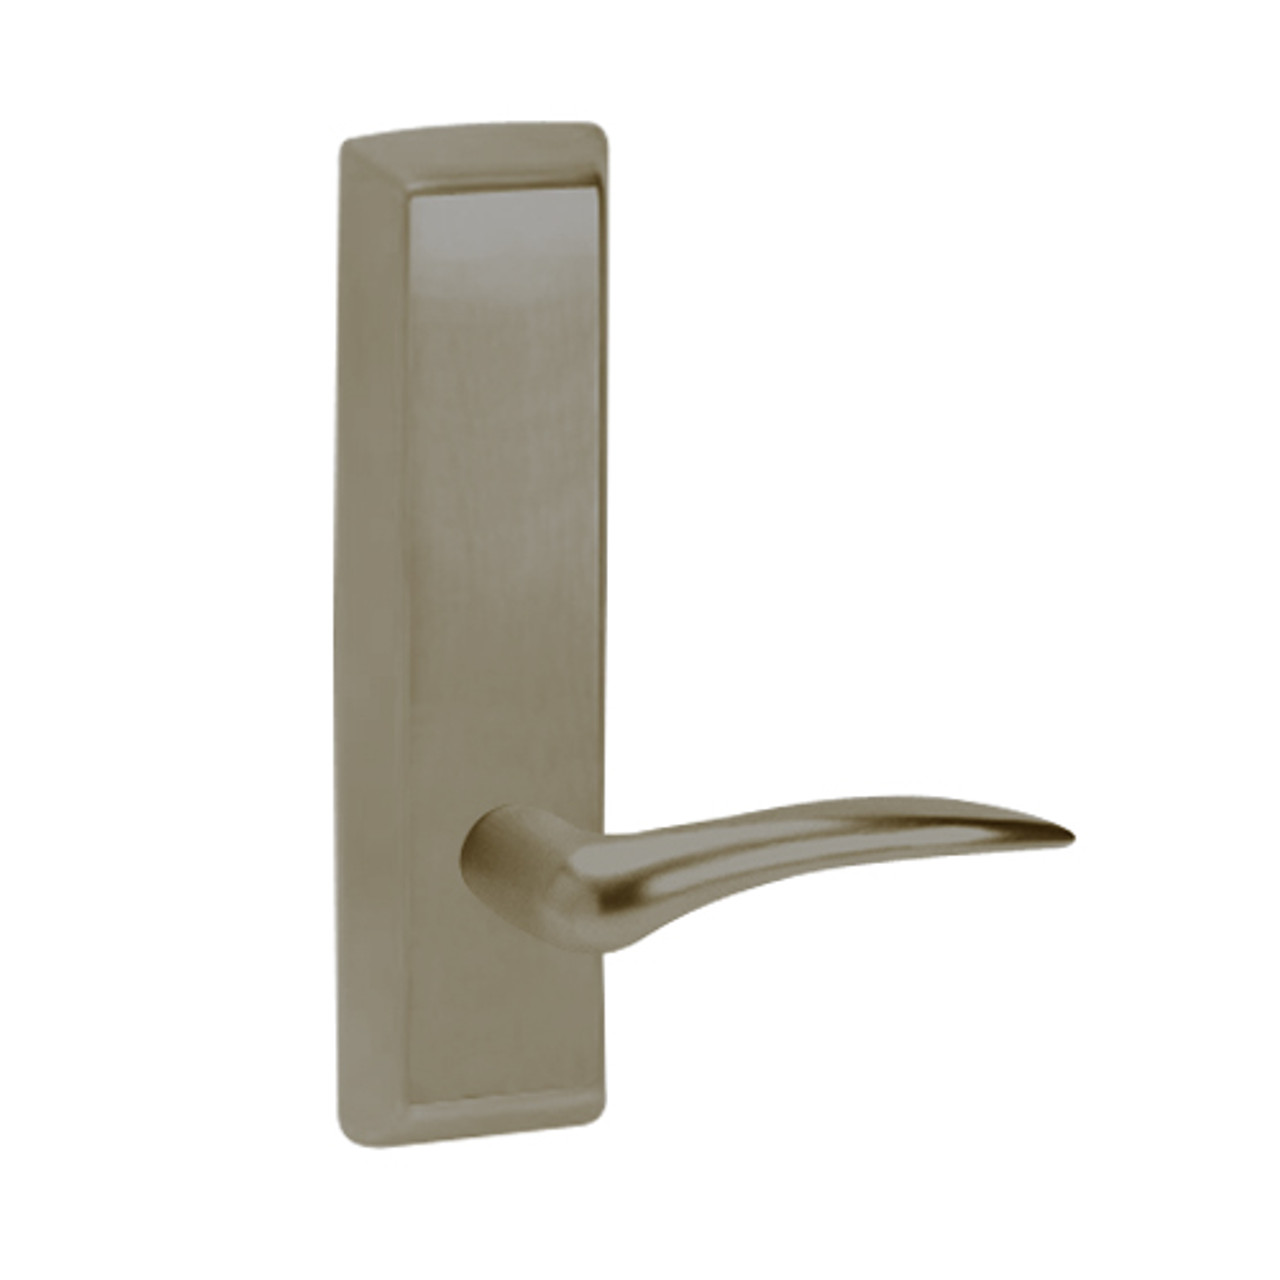 D955-613-LHR Corbin ED5000 Series Exit Device Trim with Classroom Dirke Lever in Oil Rubbed Bronze Finish